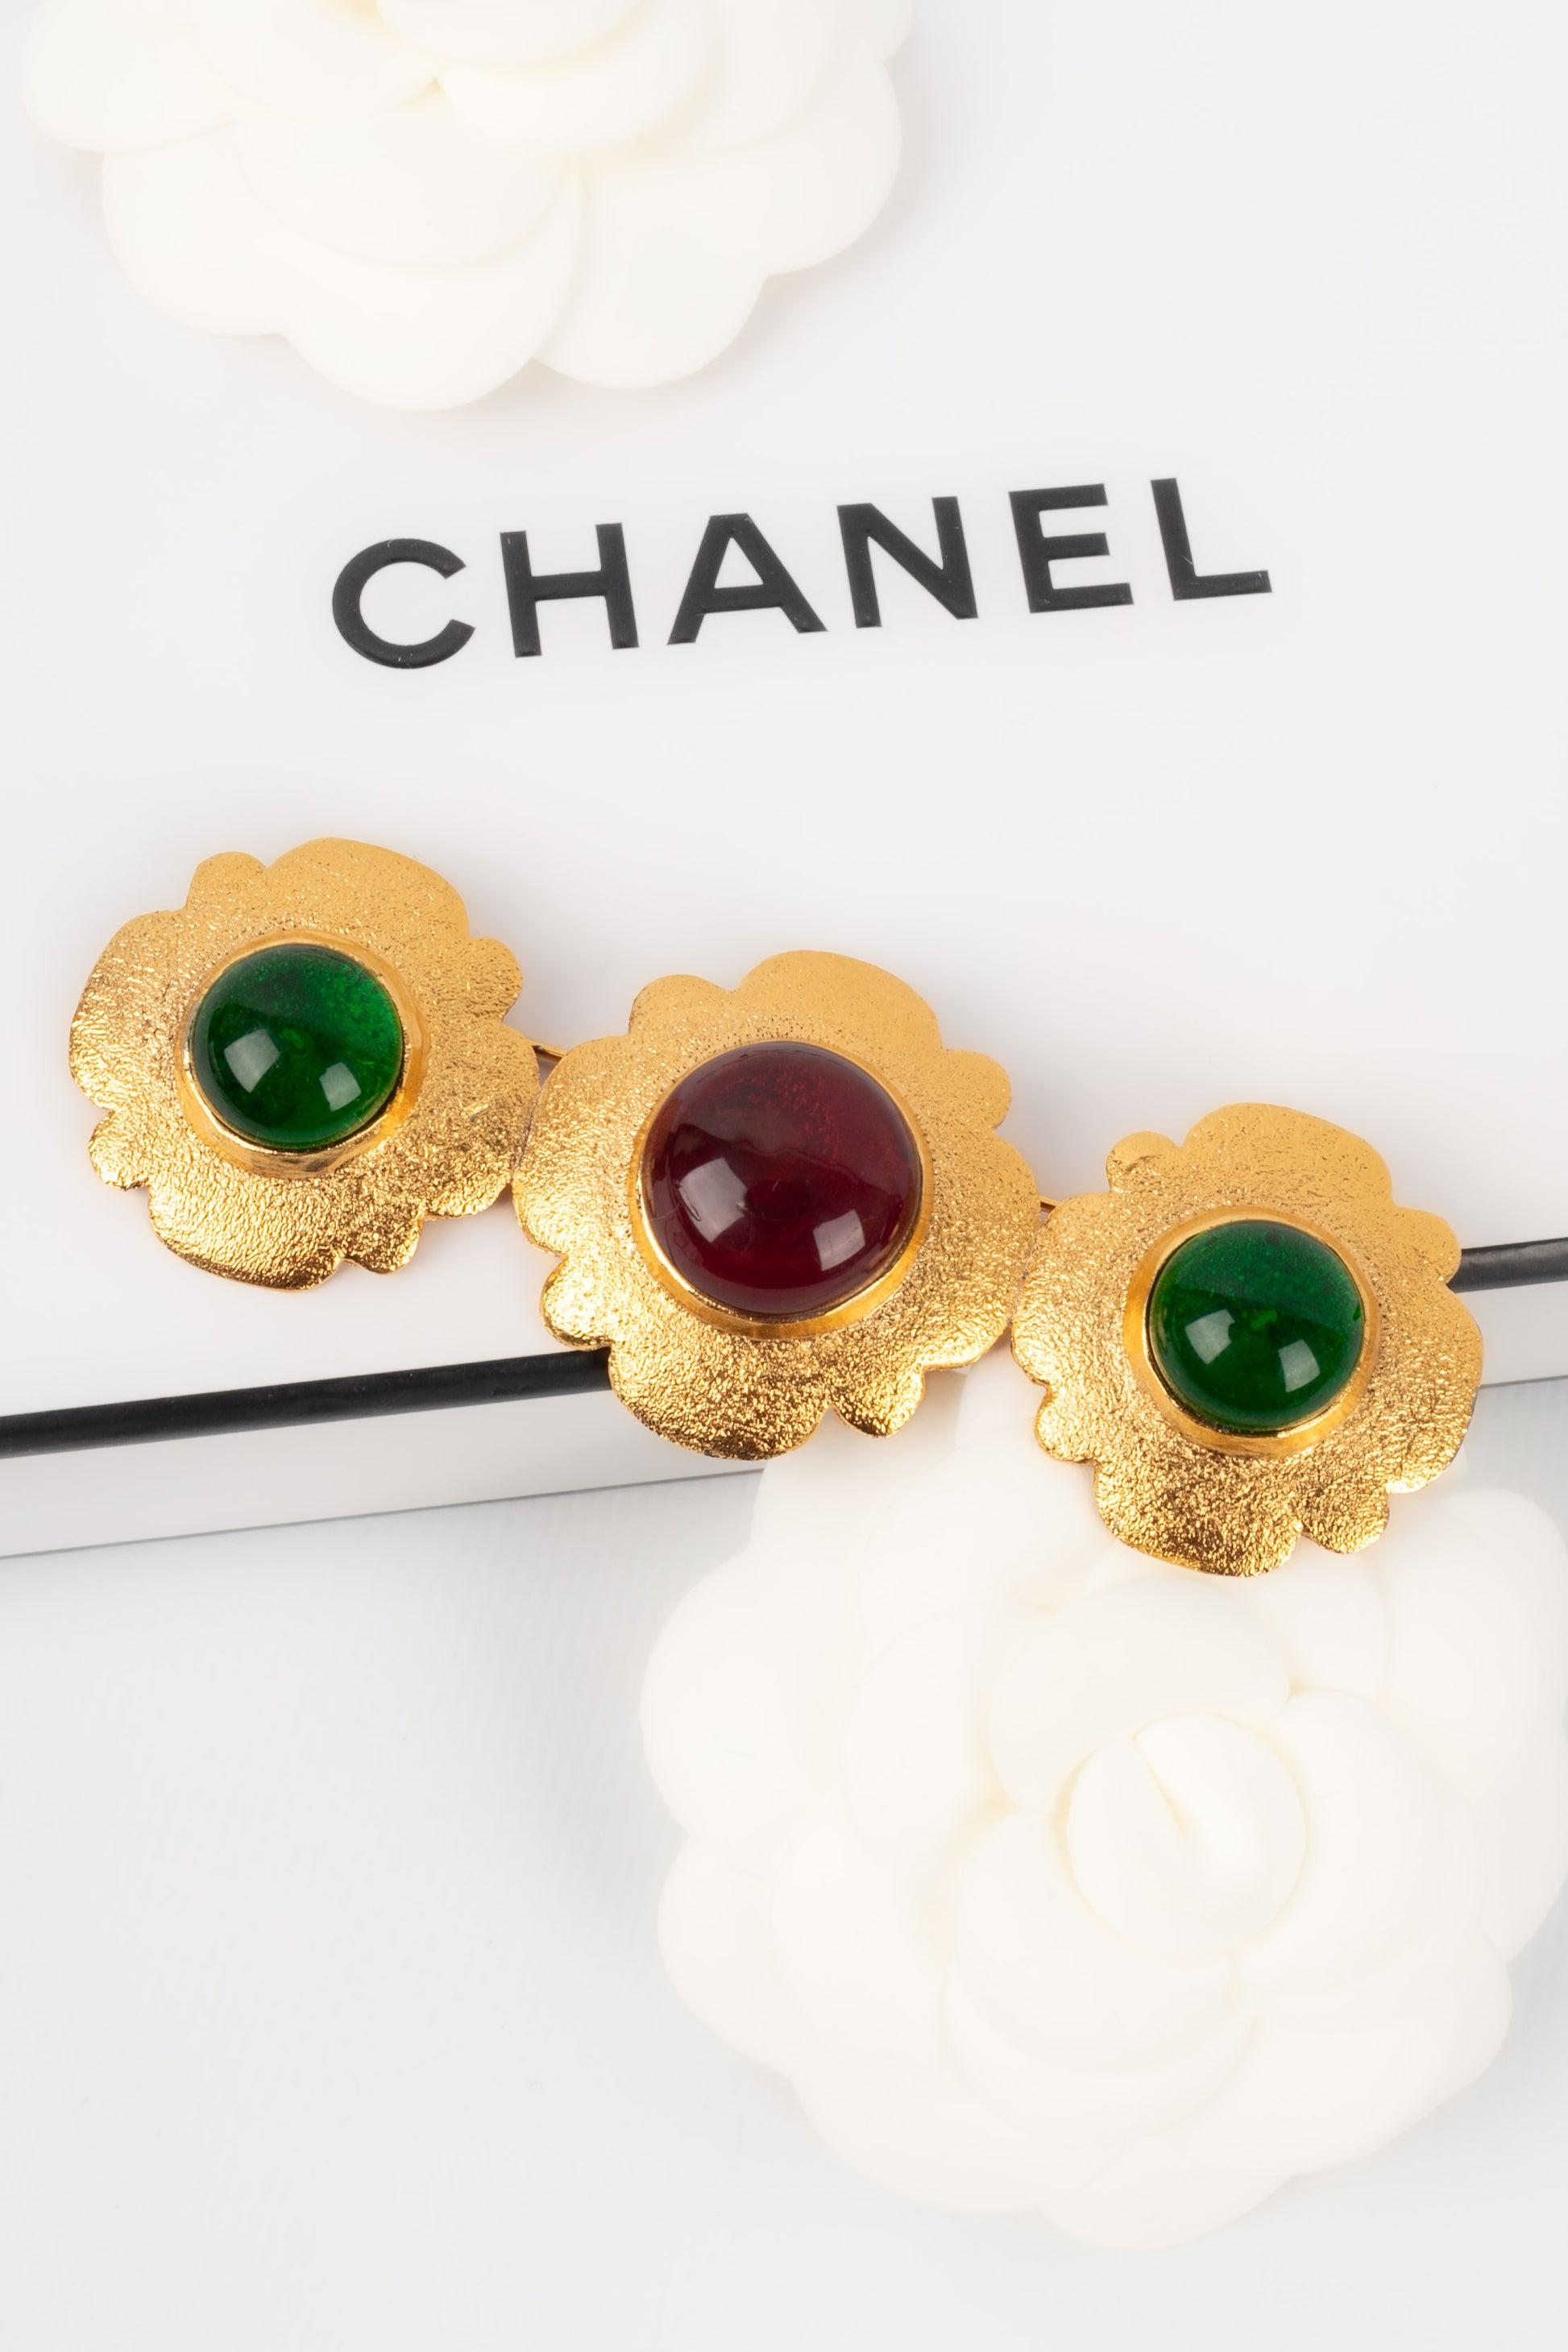 Chanel Brooch In Gold-Plated Metal with Three Colored Glass, 1980s For Sale 2